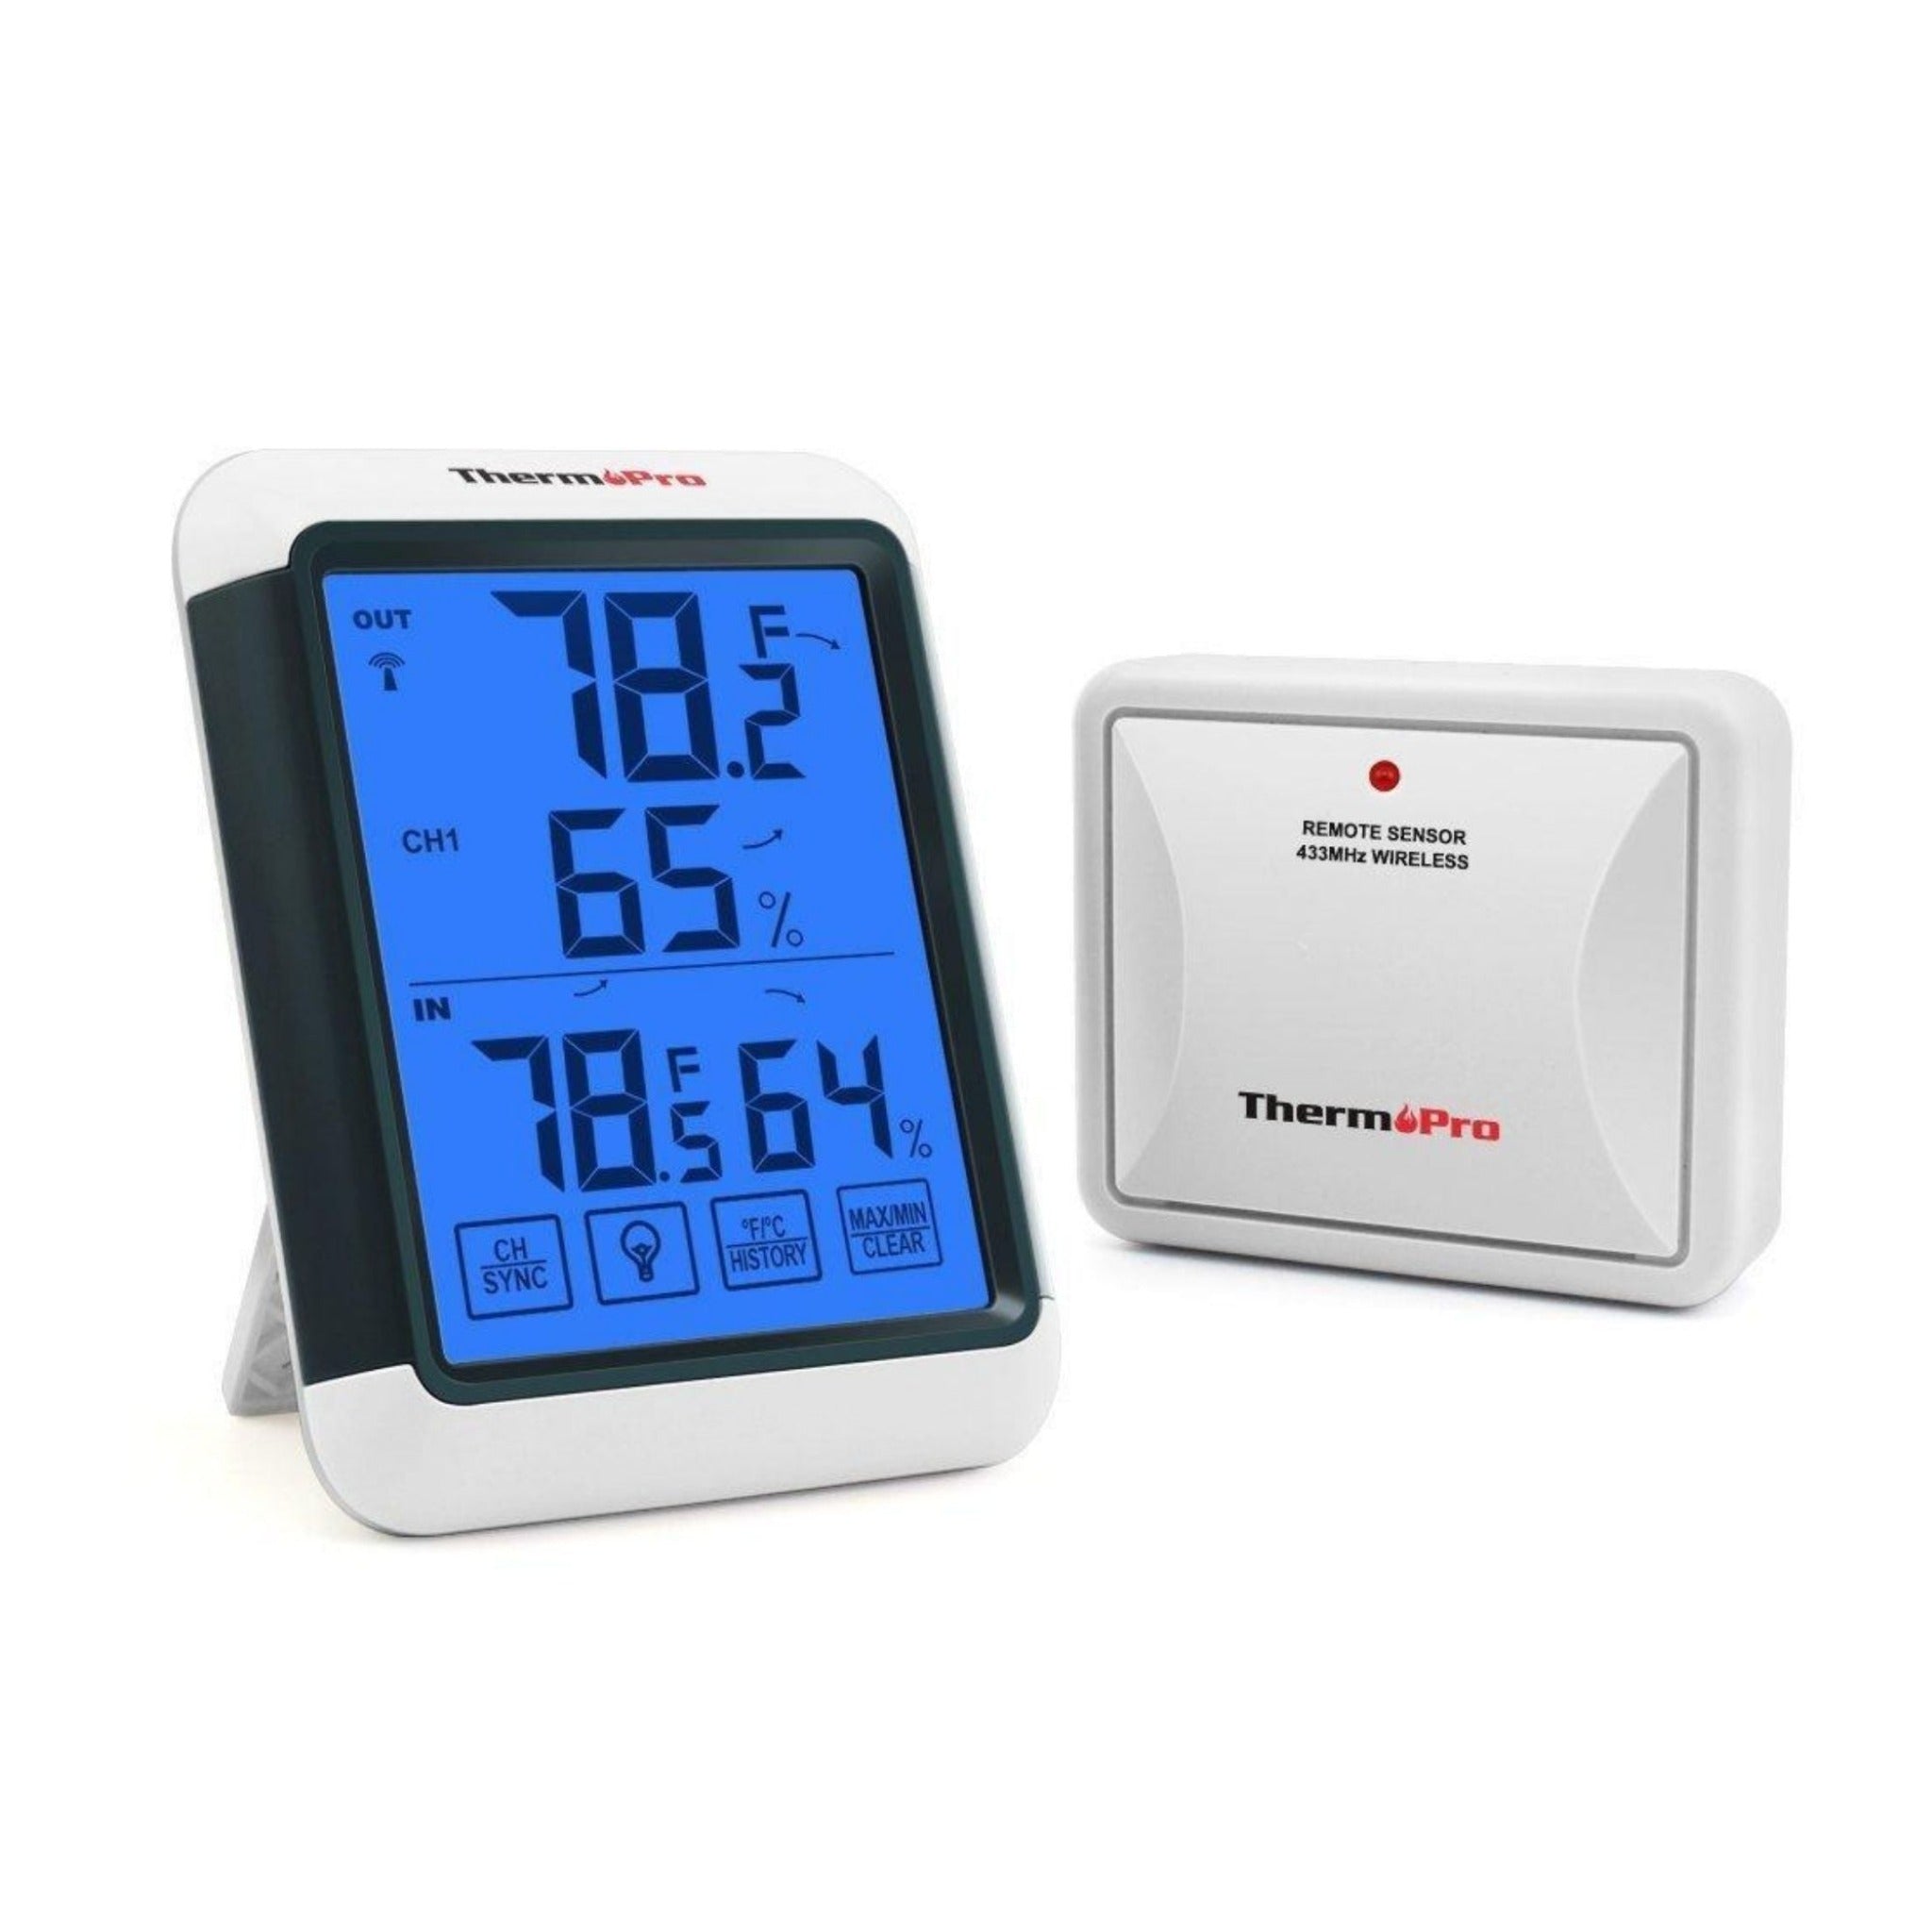 Hatching Time Therm Pro display visible showing temperature, and humidity percentage. Wireless sensor is also shown in image. 433 MHz Wireless signal shown.